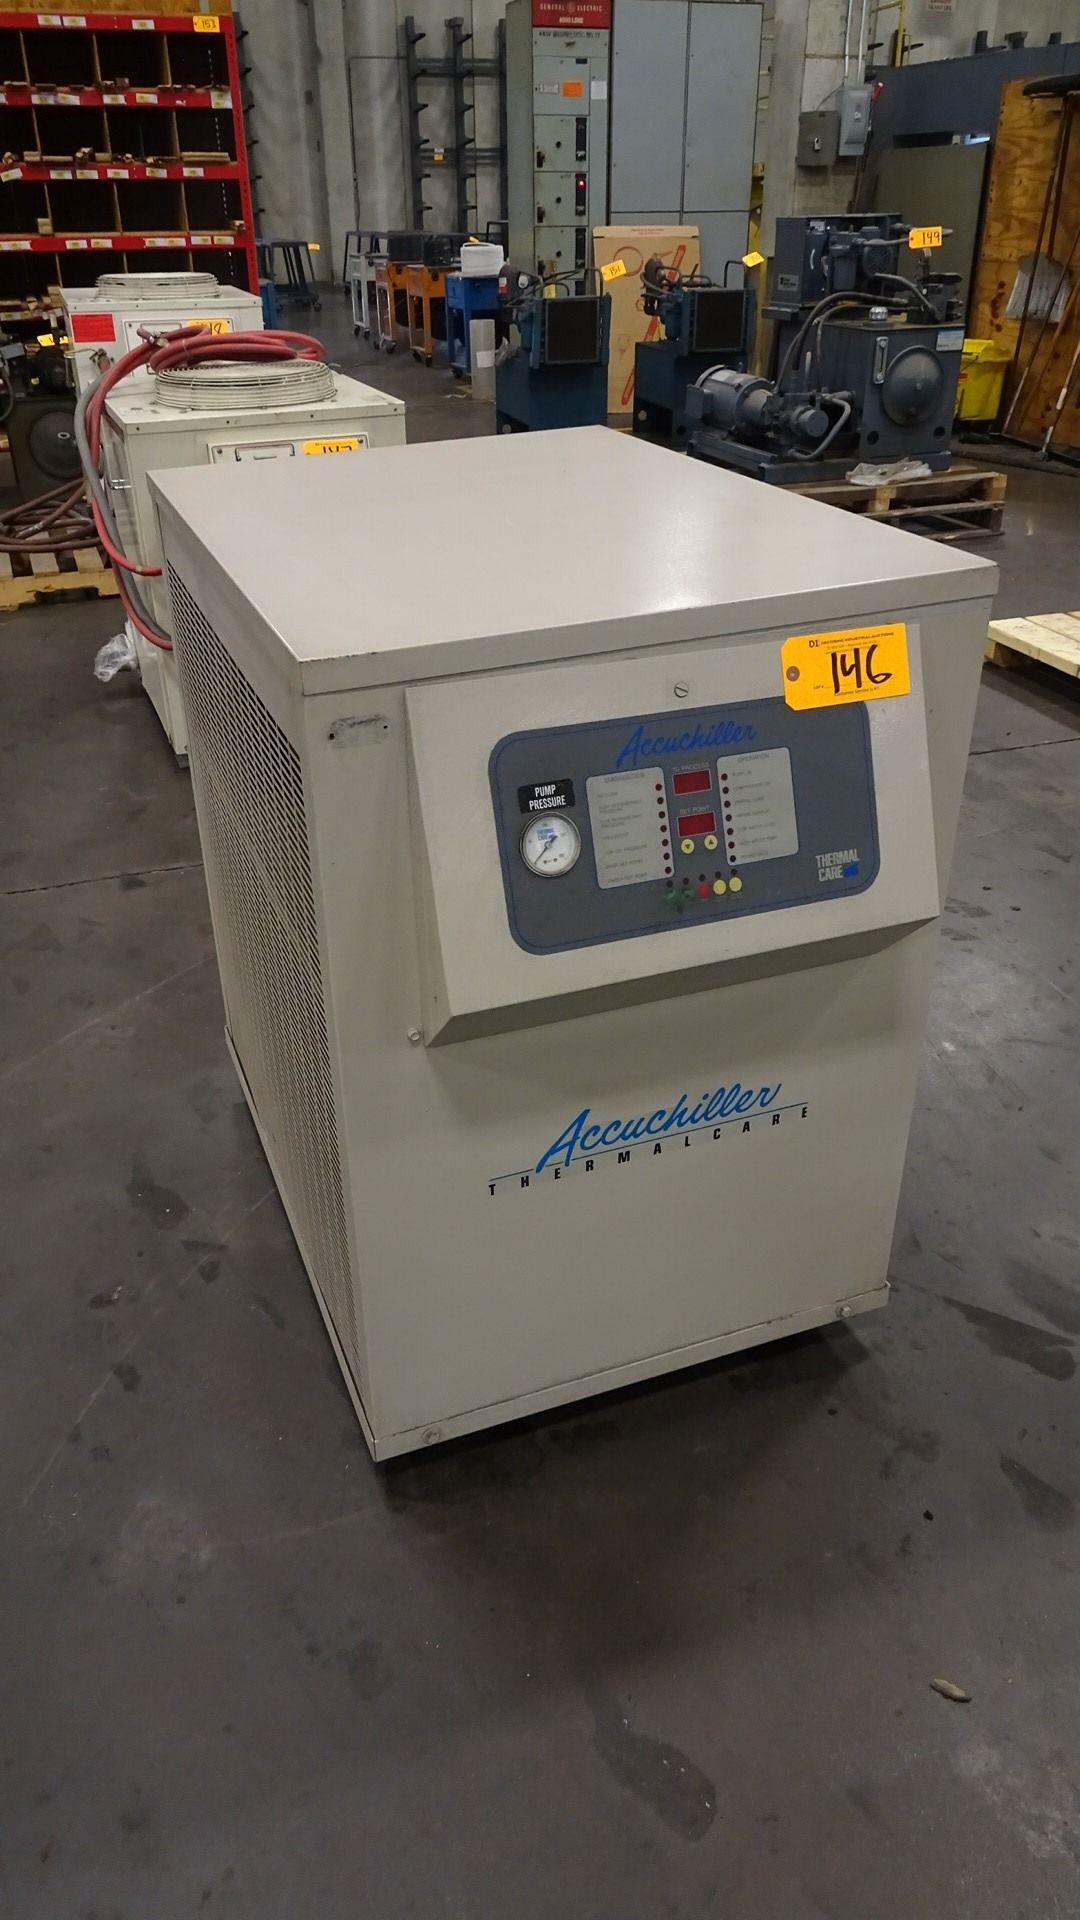 Thermal Model ACH 122 Care Accu-Chiller, sn: 002-122